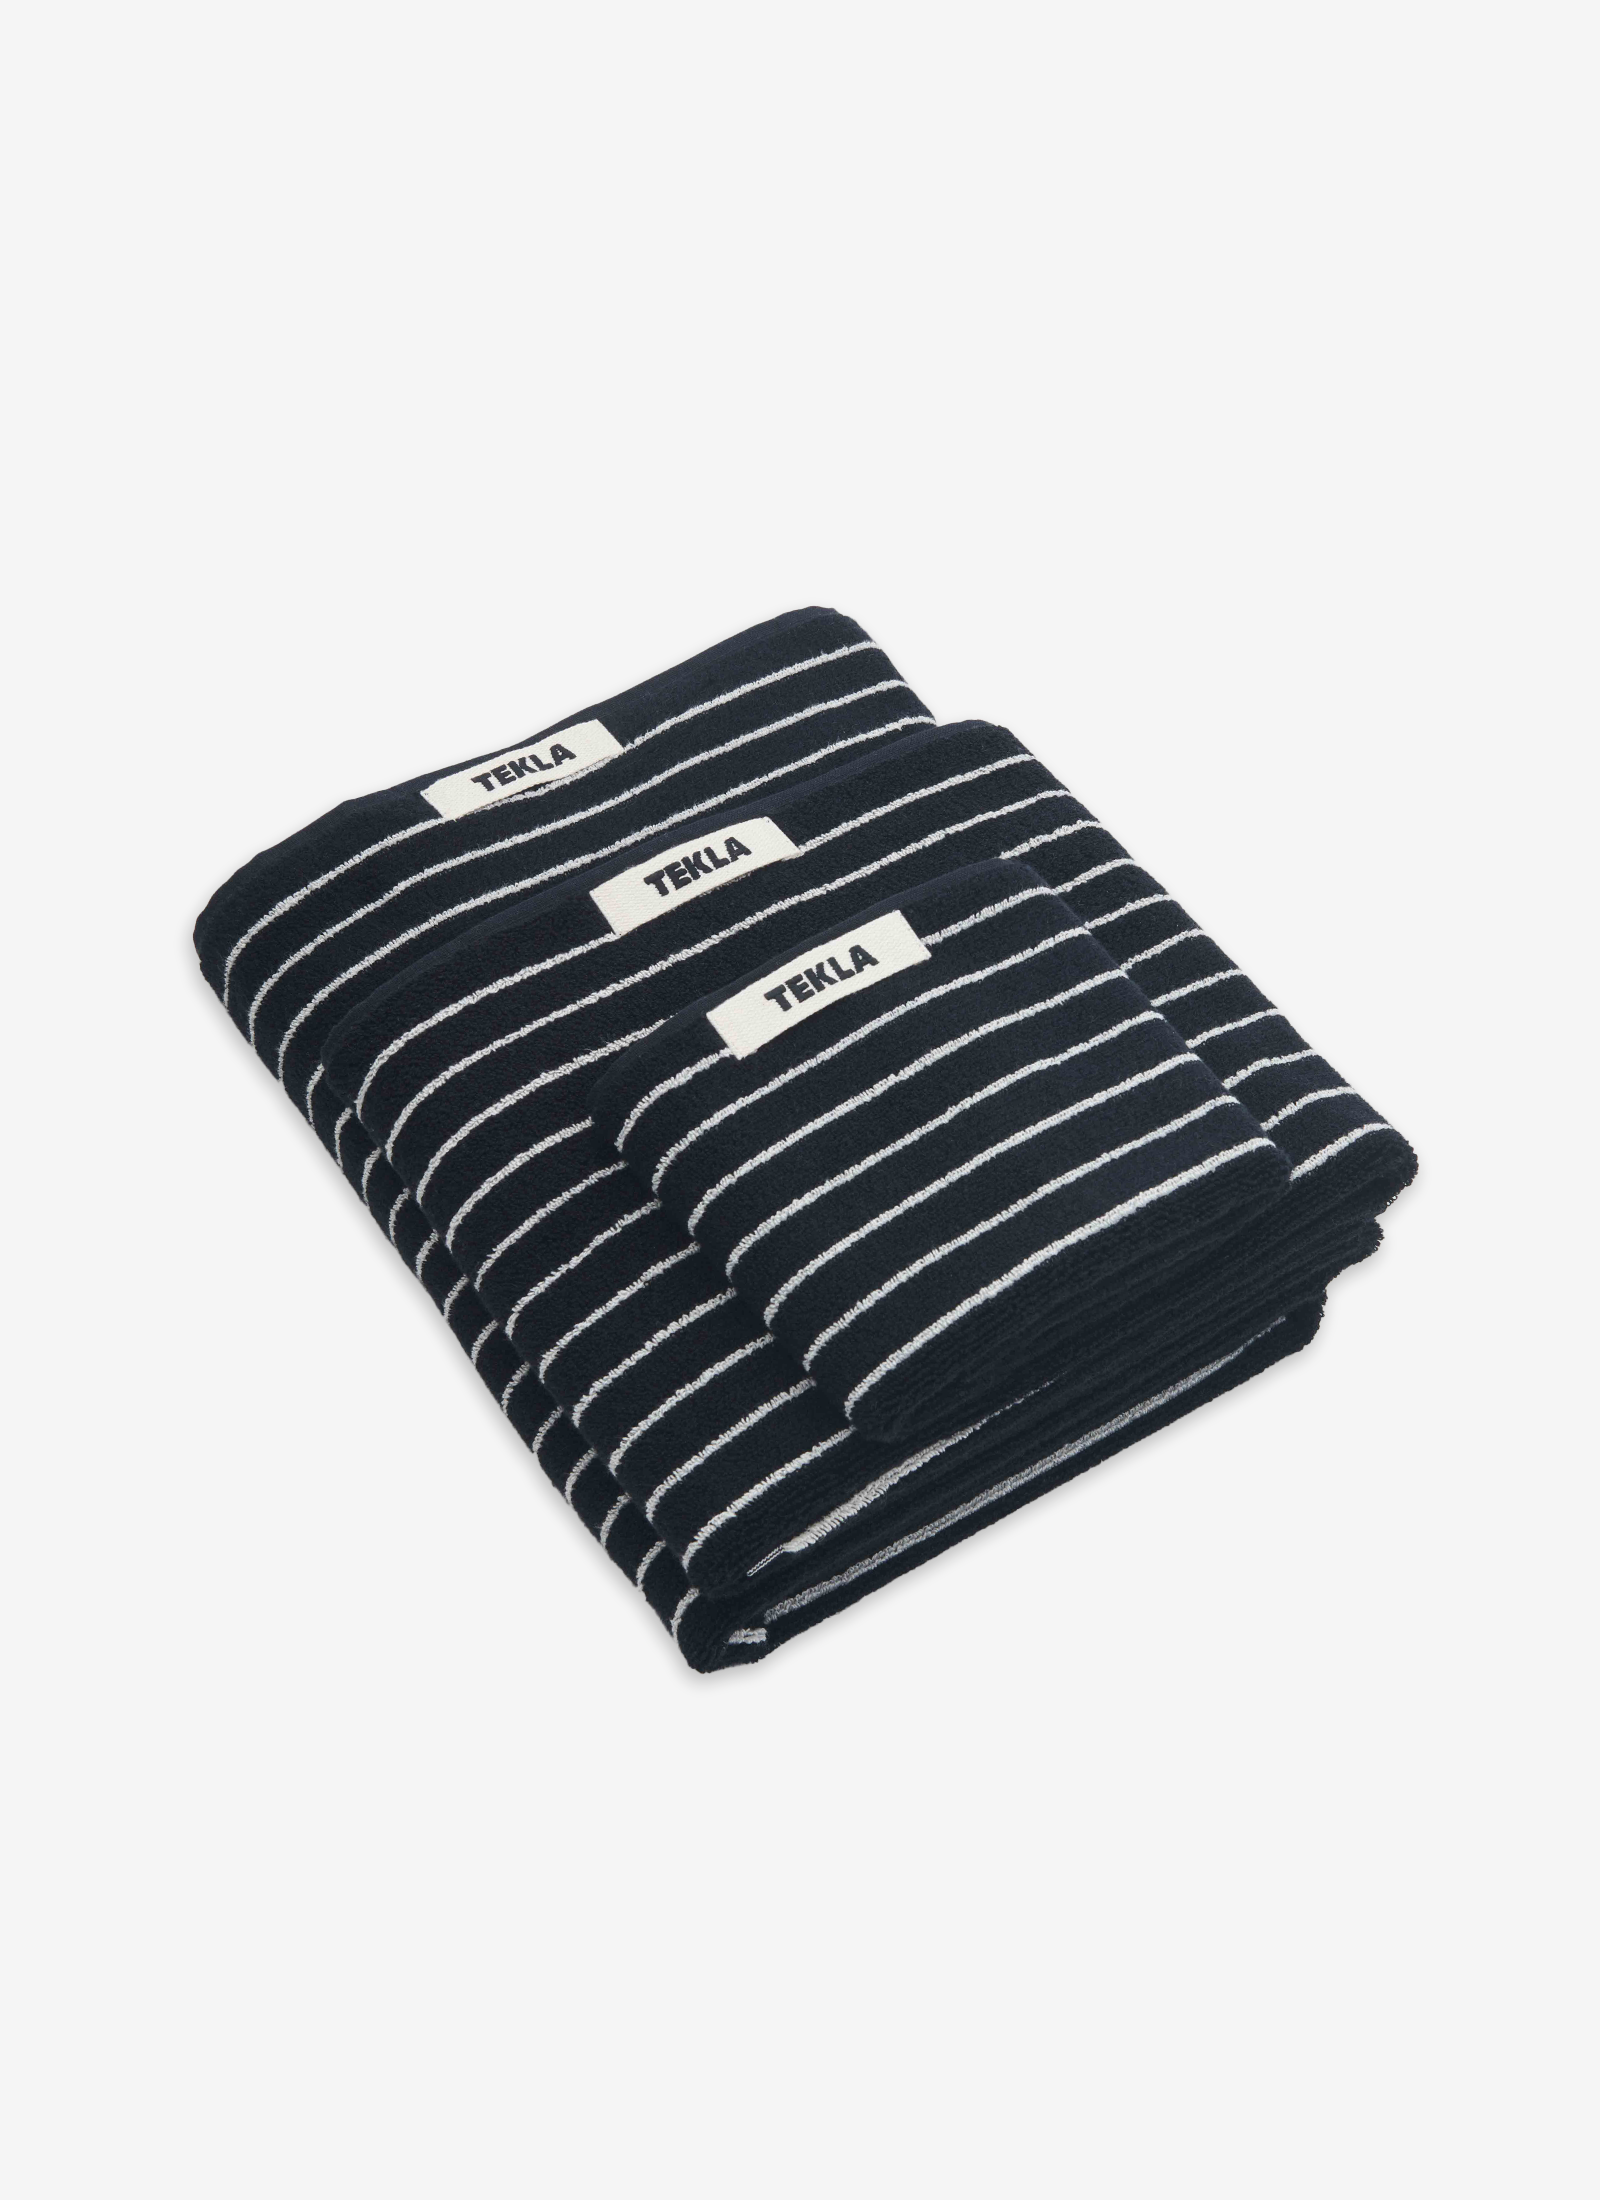 Organic Cotton Towels - Black and White Stripes